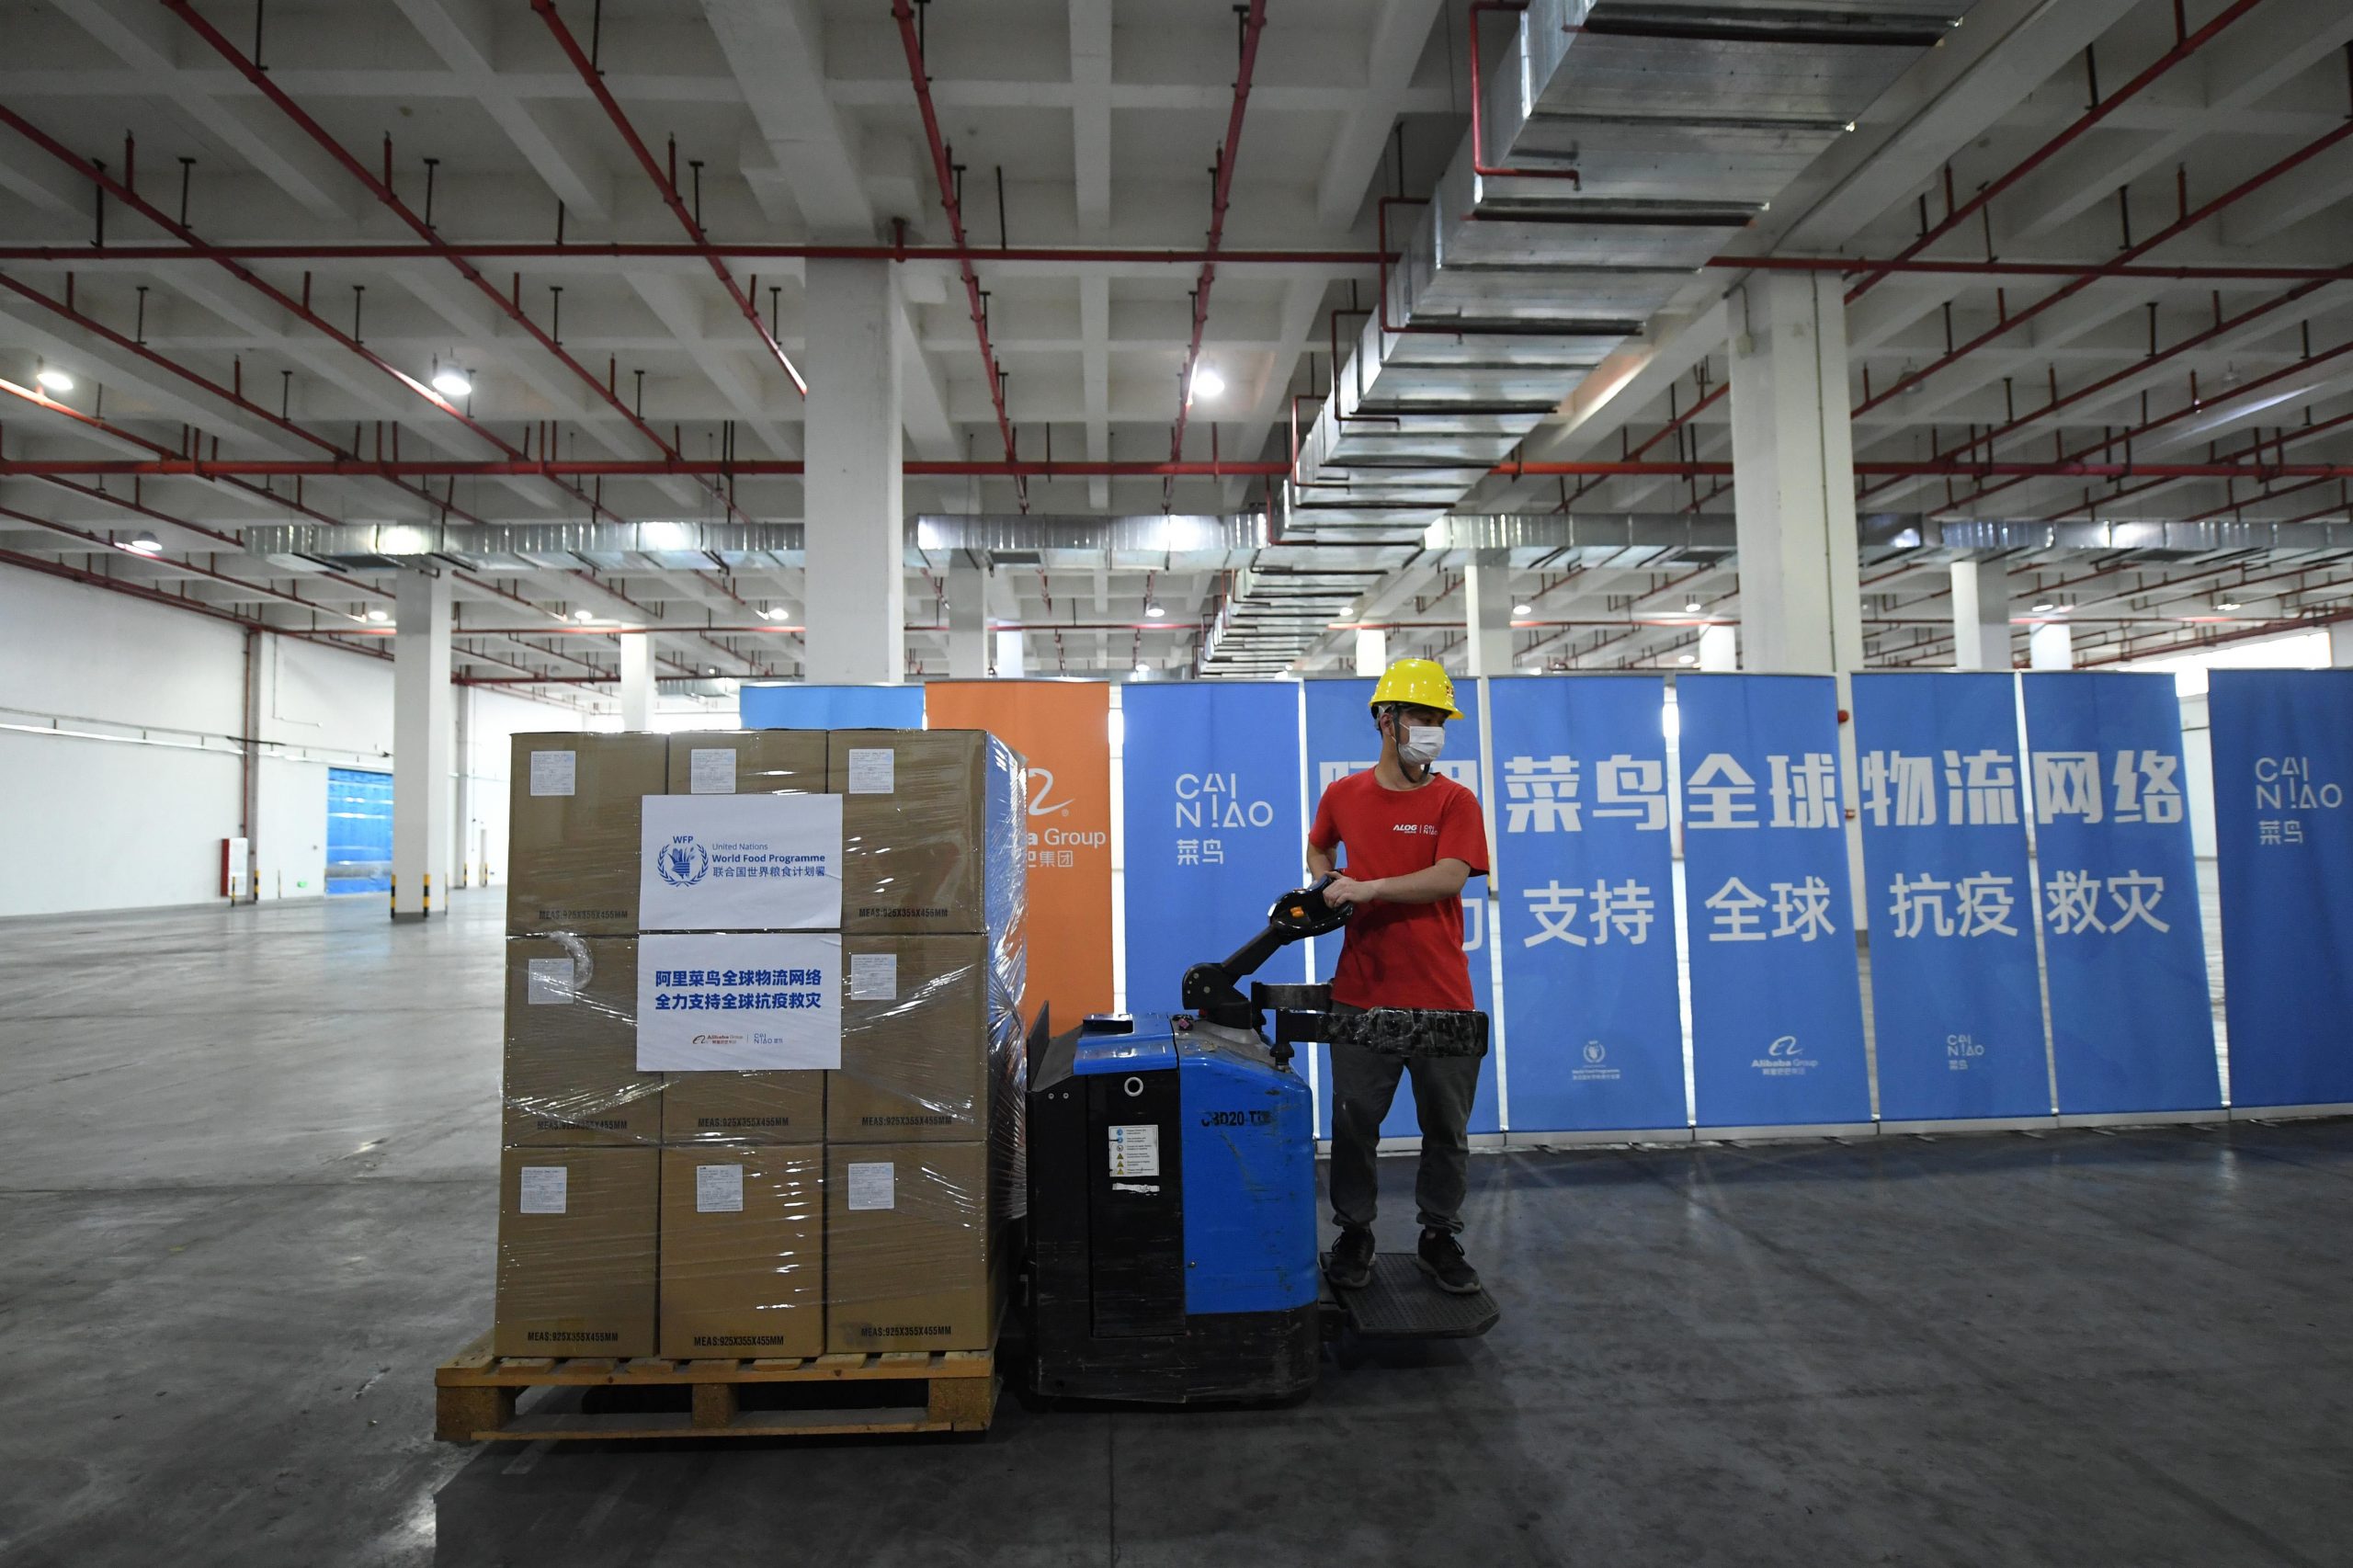 A staff member arranges boxes of anti-epidemic supplies of the United Nations World Food Programme (WFP) at Cainiao's Nansha warehouse on in Guangzhou, China on April 29, 2020.